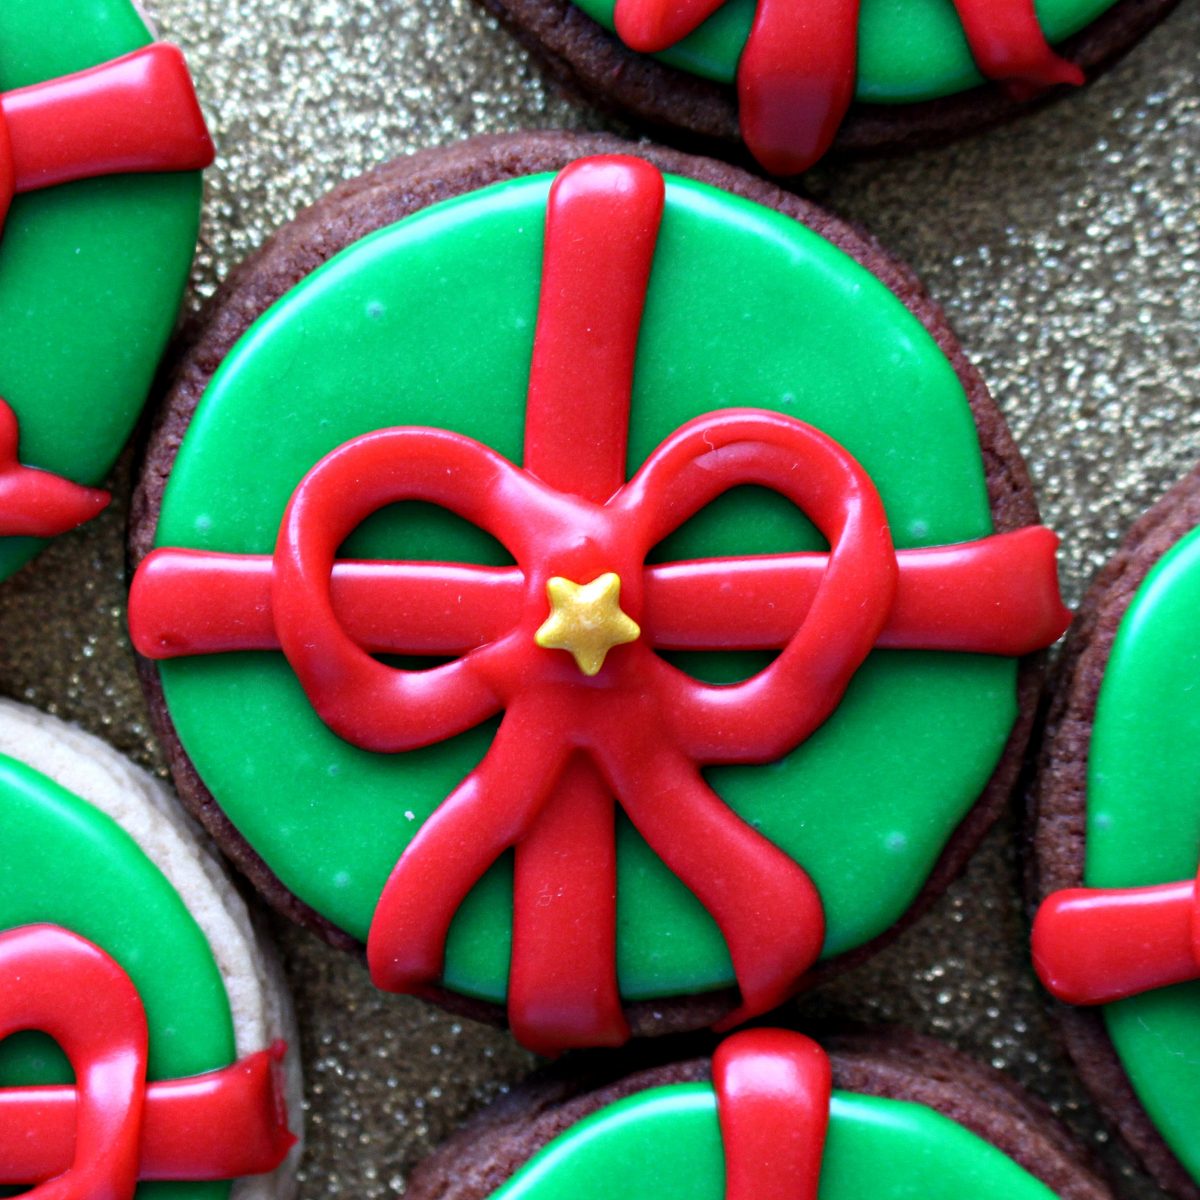 Closeup of cookies iced green with a red icing bow.